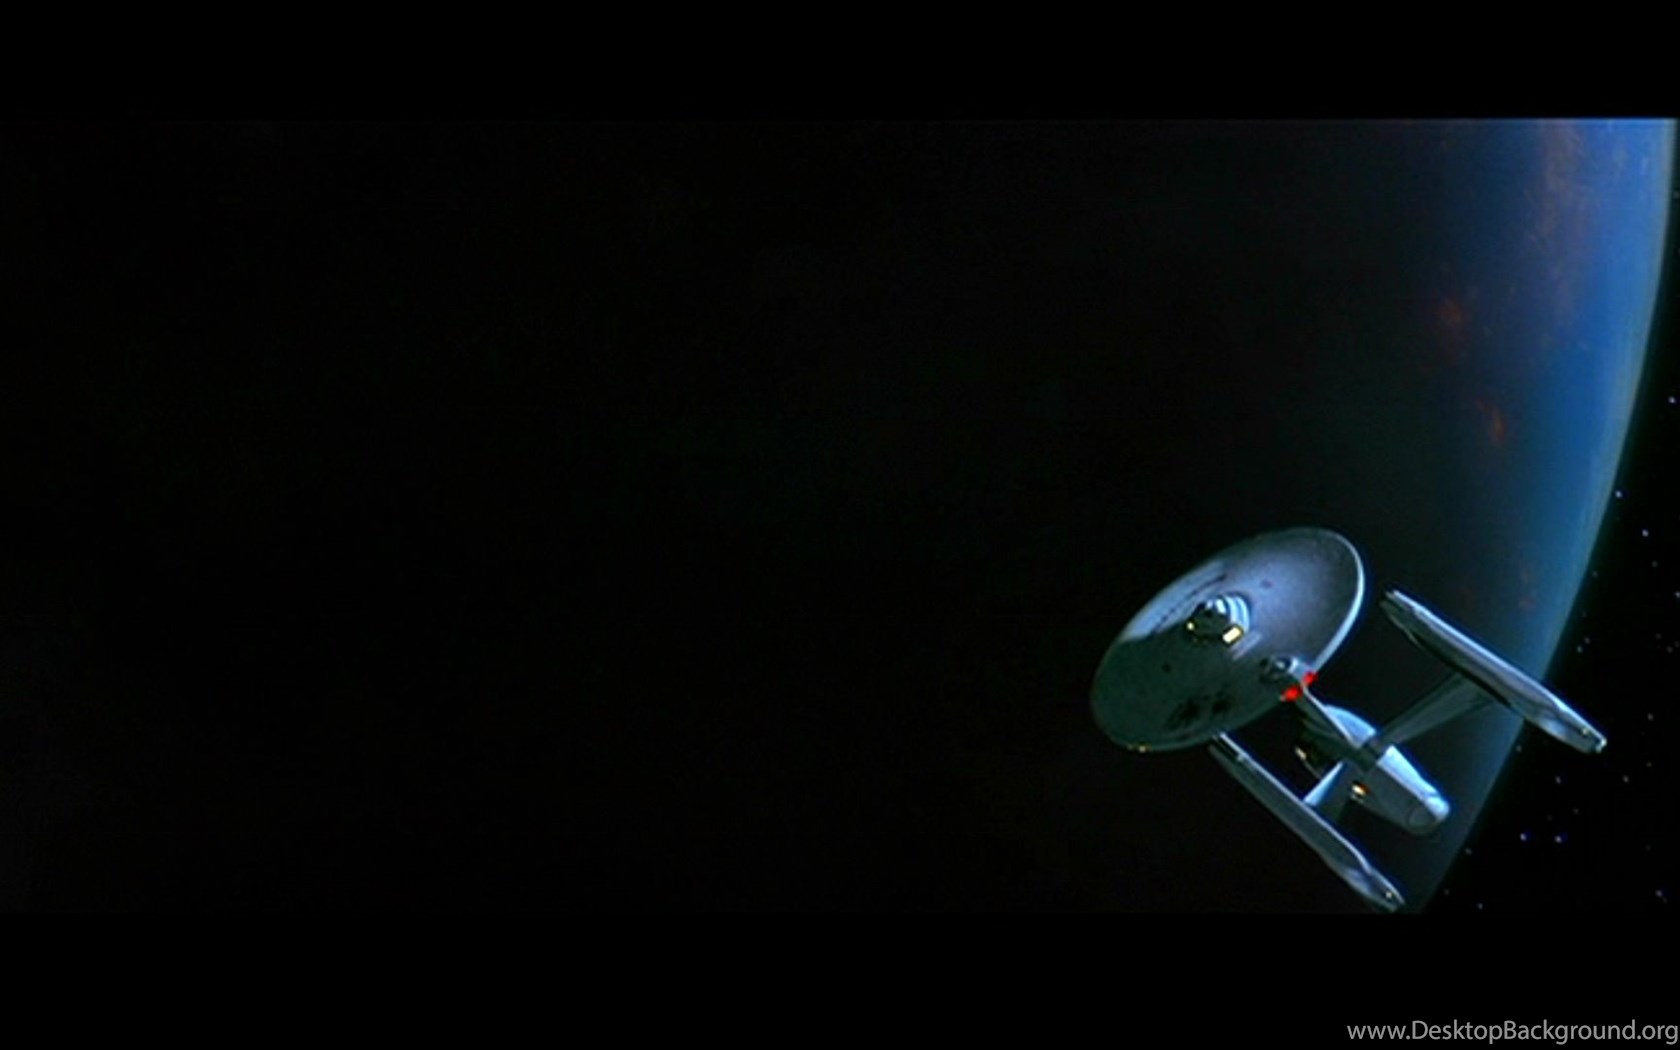 Star Trek Iii: The Search For Spock Wallpapers